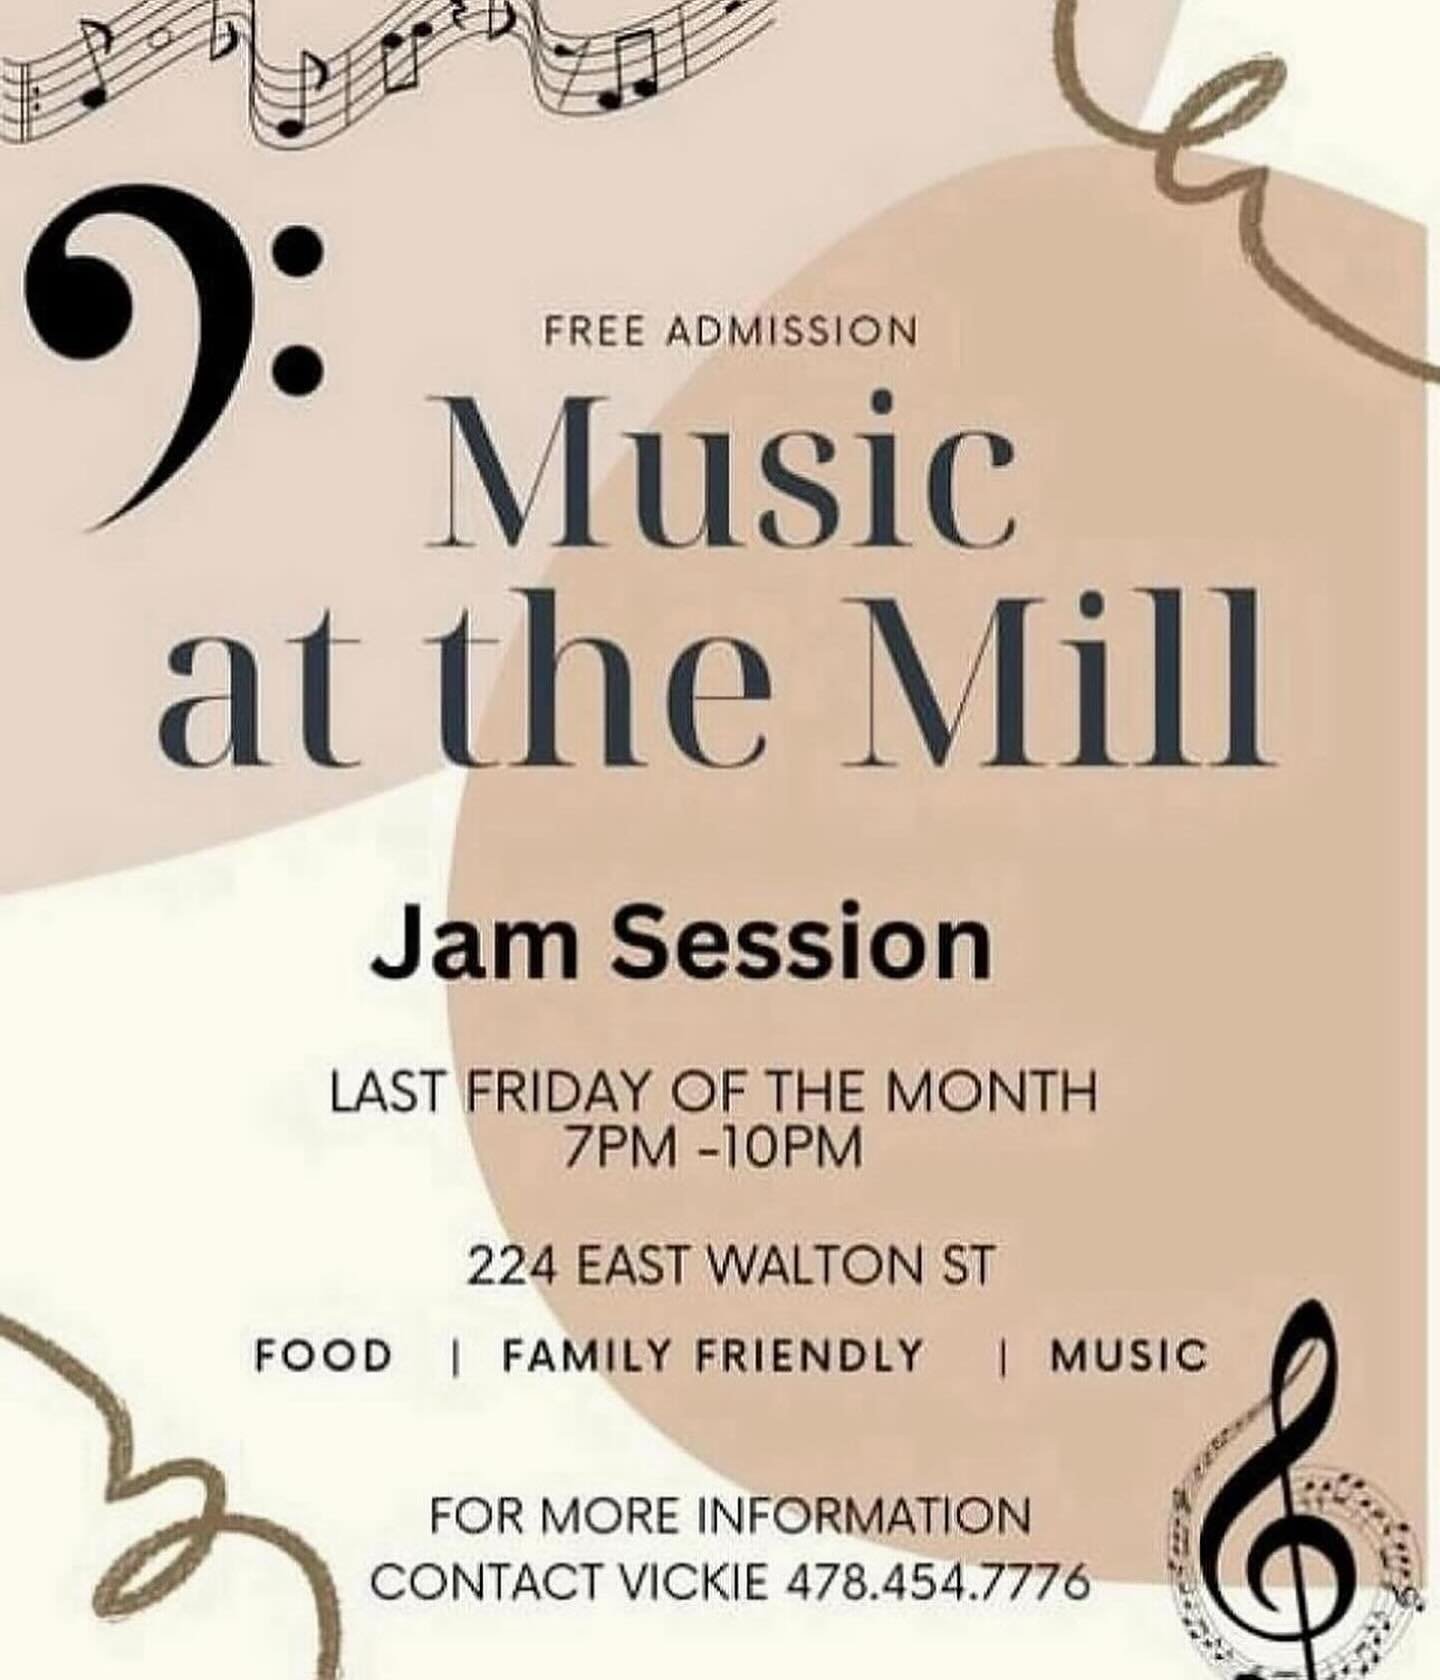 TONIGHT!!!
At New City, we love to fellowship with our community! We have a great opportunity coming up! Join us FRIDAY, April 26, from 7-10 for Music at the Mill! A great time to grab some free food and listen to some great music! Message here or co